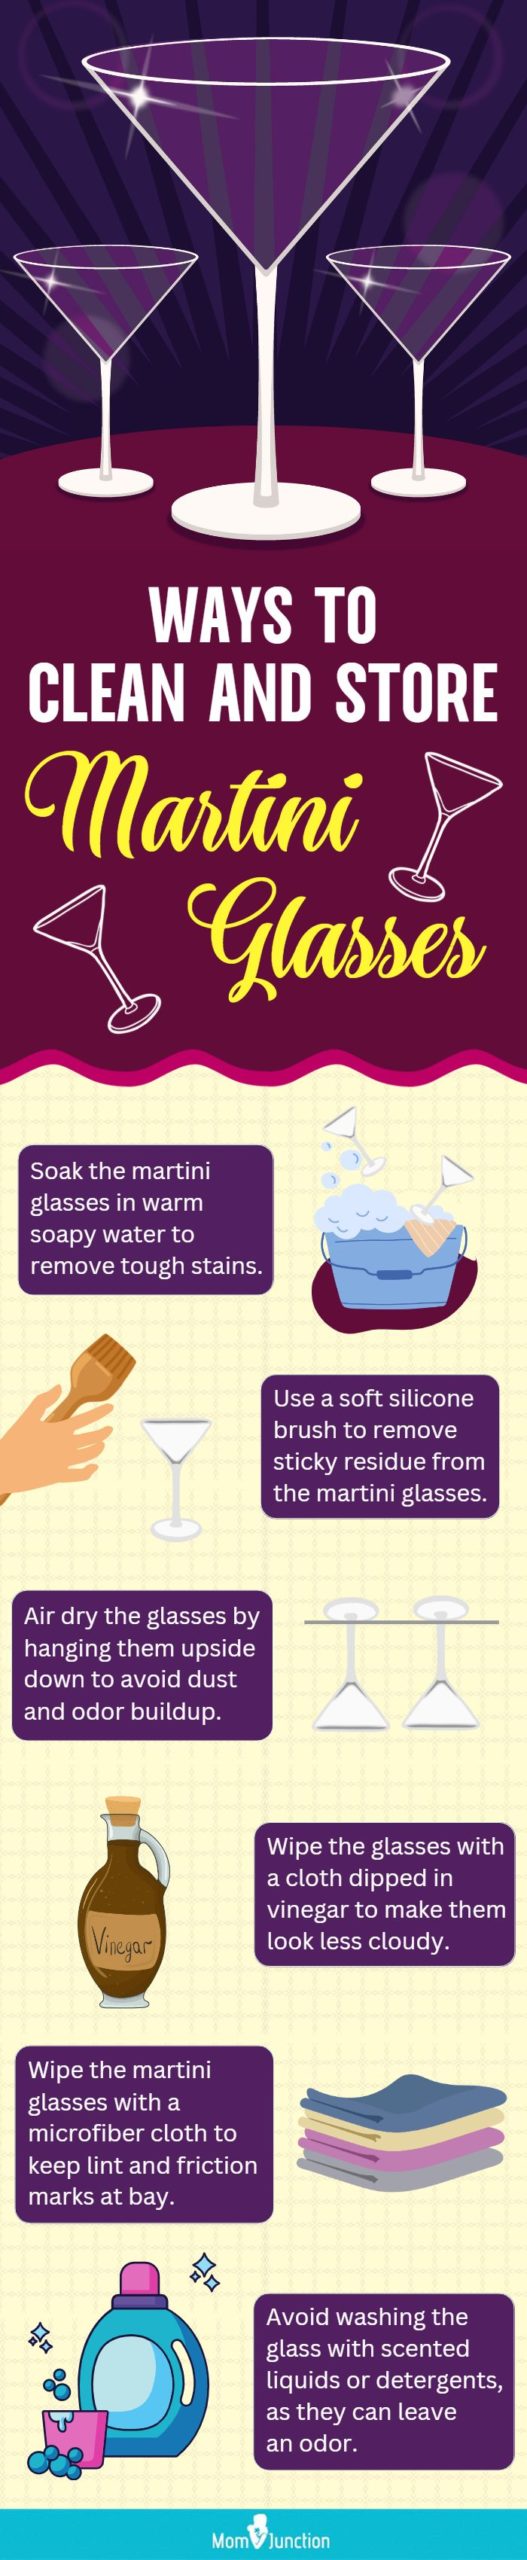 Ways To Clean And Store Martini Glasses (infographic)